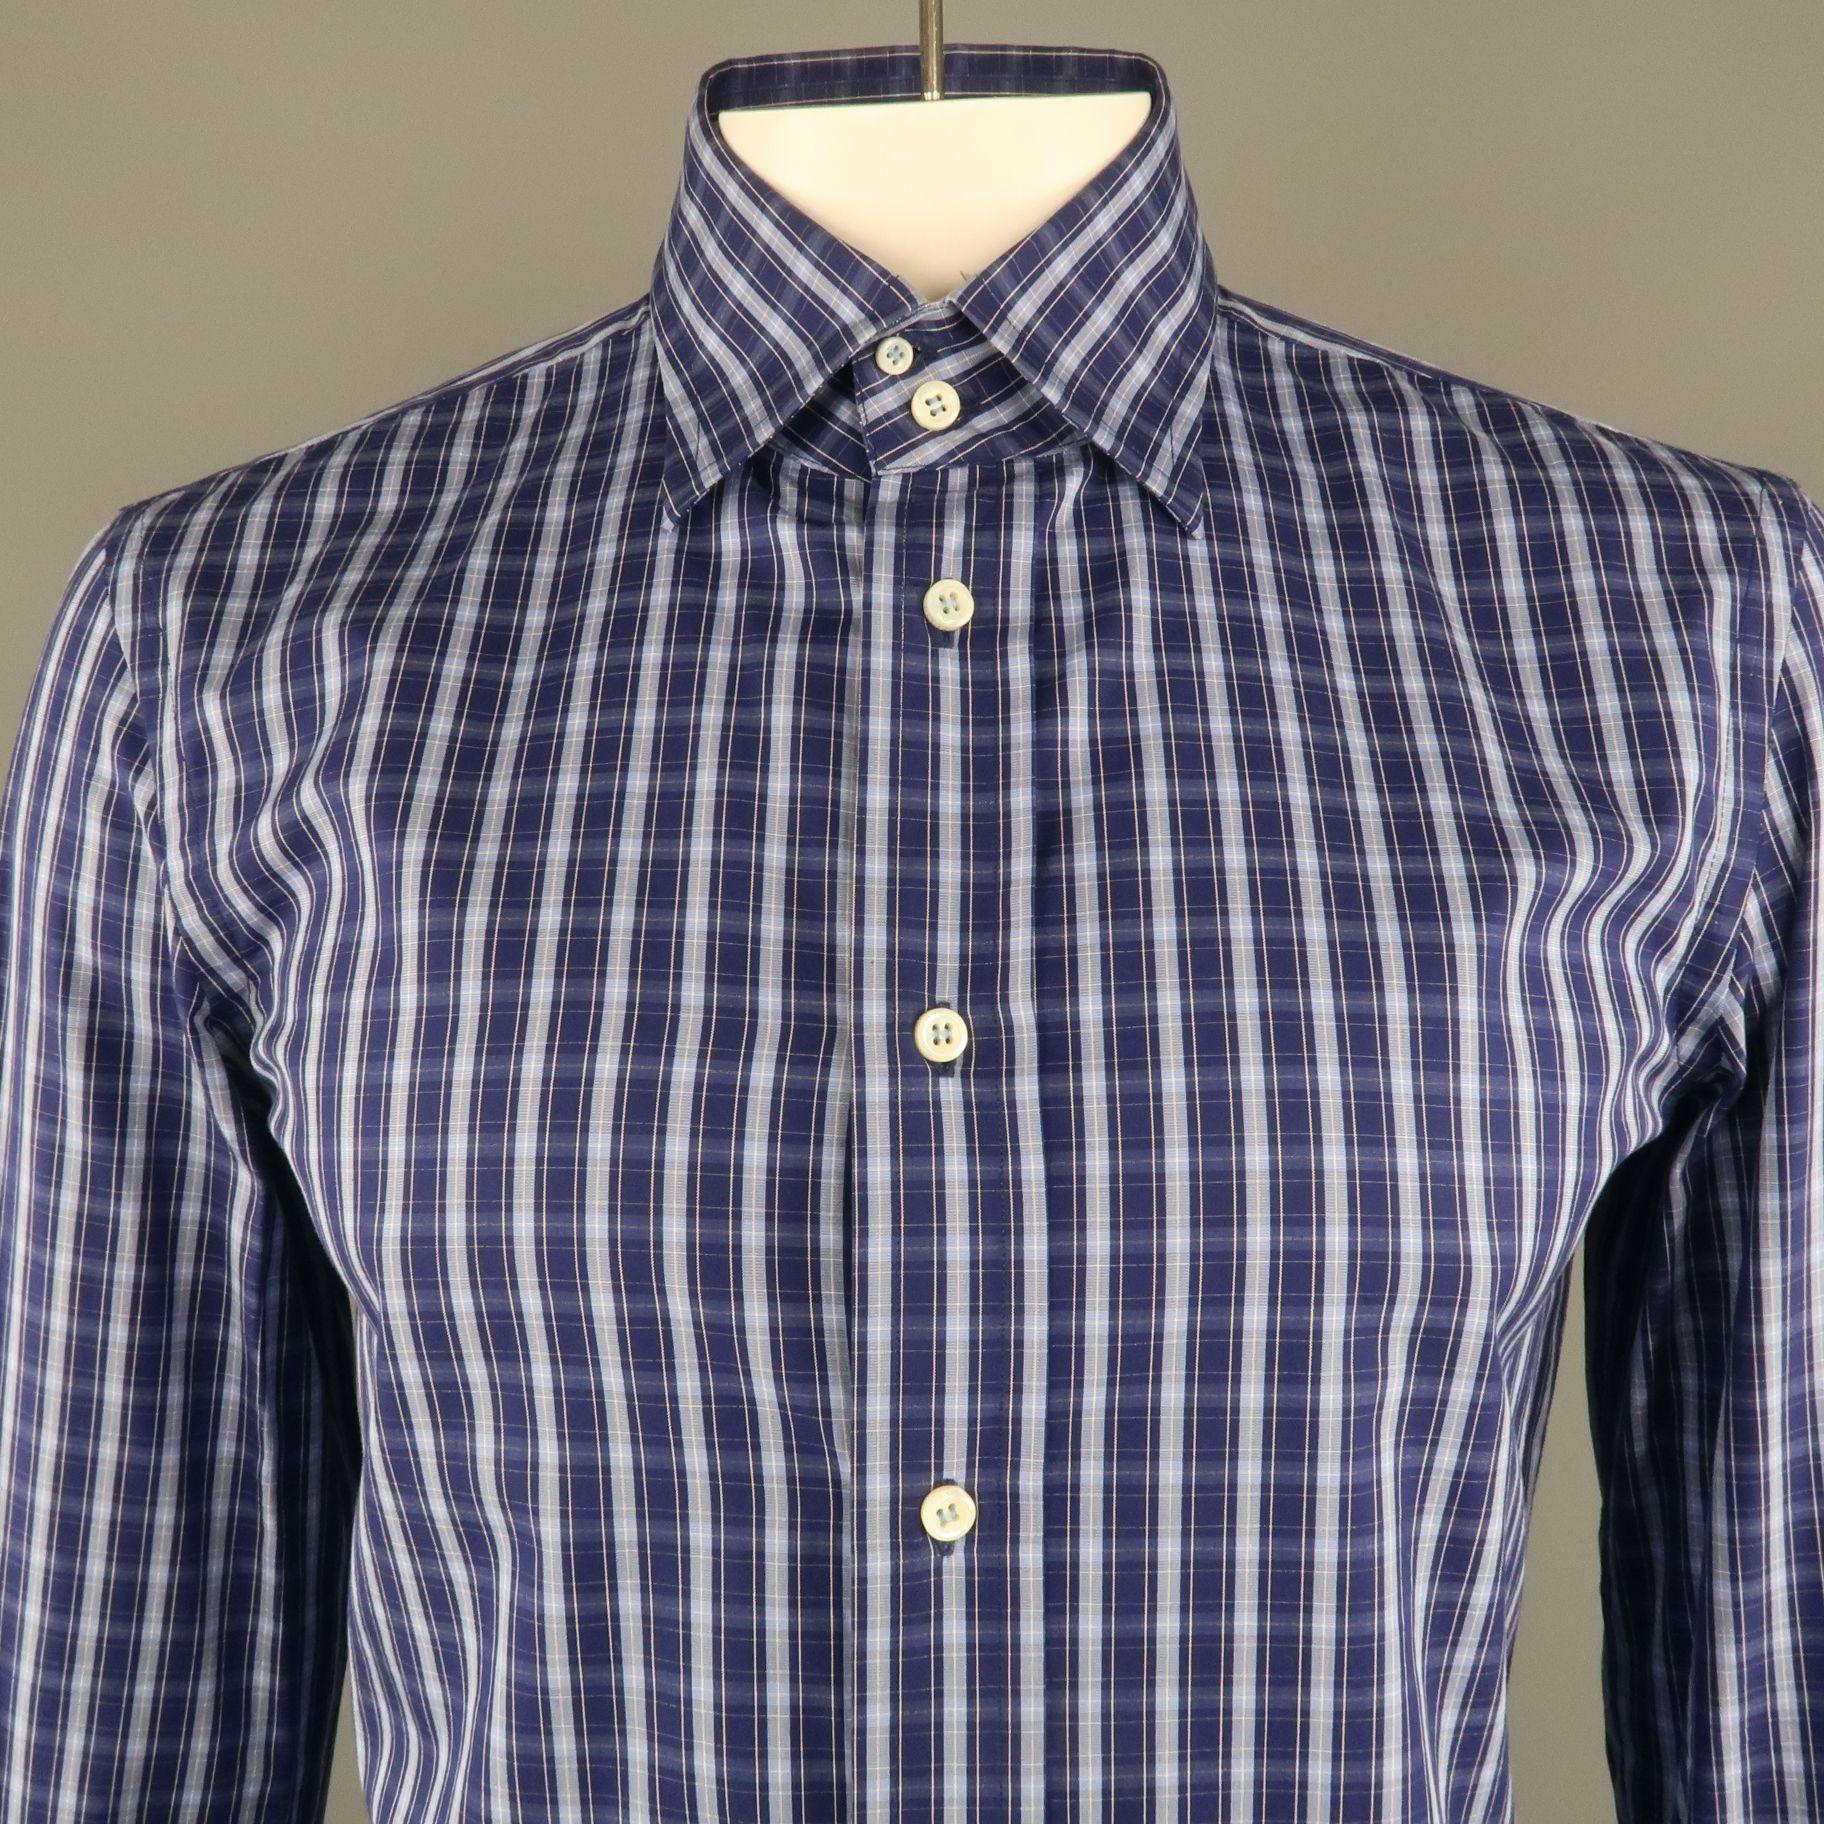 DSQUARED2 long sleeve shirt comes in a navy plaid cotton featuring a spread collar with a three button cuff closure. Made in Italy
 
Excellent Pre-Owned Condition.
Marked: IT 54
 
Measurements:
 
Shoulder: 18 in.
Chest: 42 in.
Sleeve: 26.5